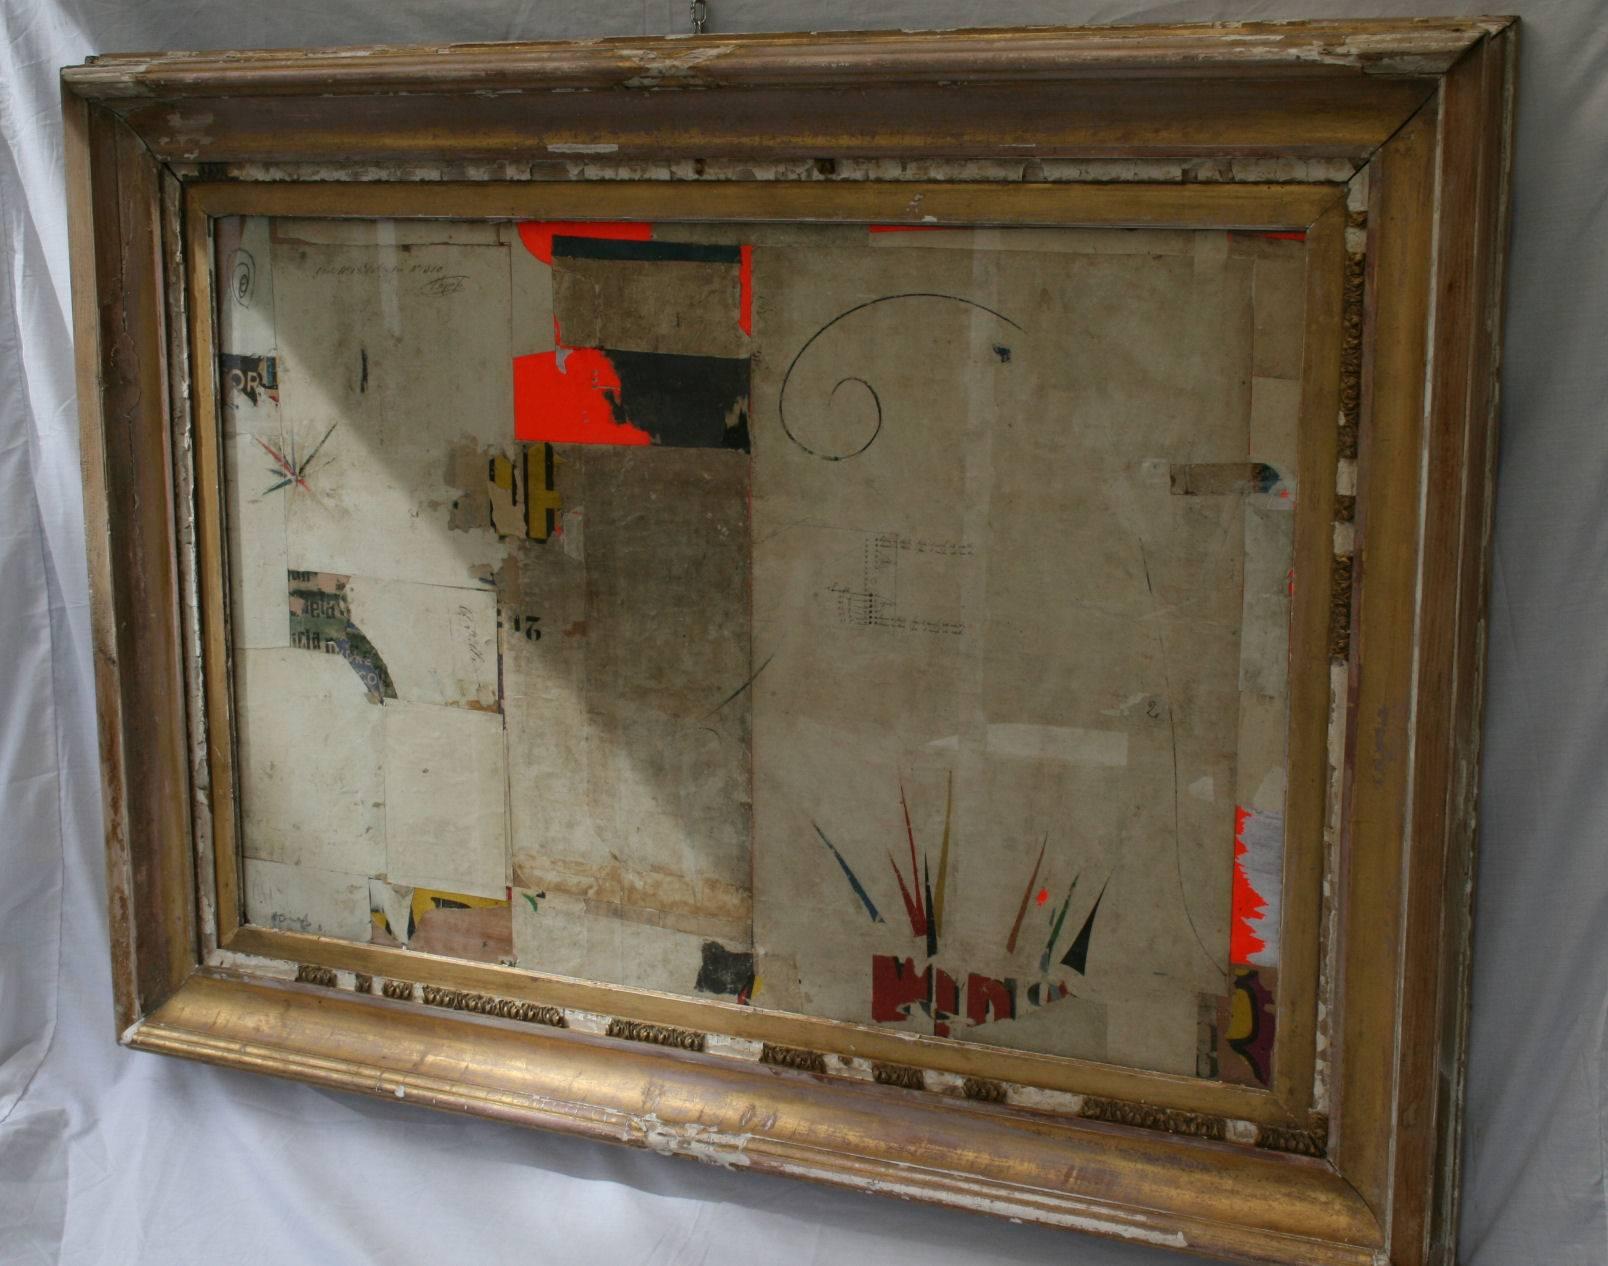 Large abstract graffiti by Huw Griffith

Large abstract graffiti. Spontaneously created to merge with the 19th century frame.

The collage has been placed into an antique frame which has been reworked by Huw and is part of the overall